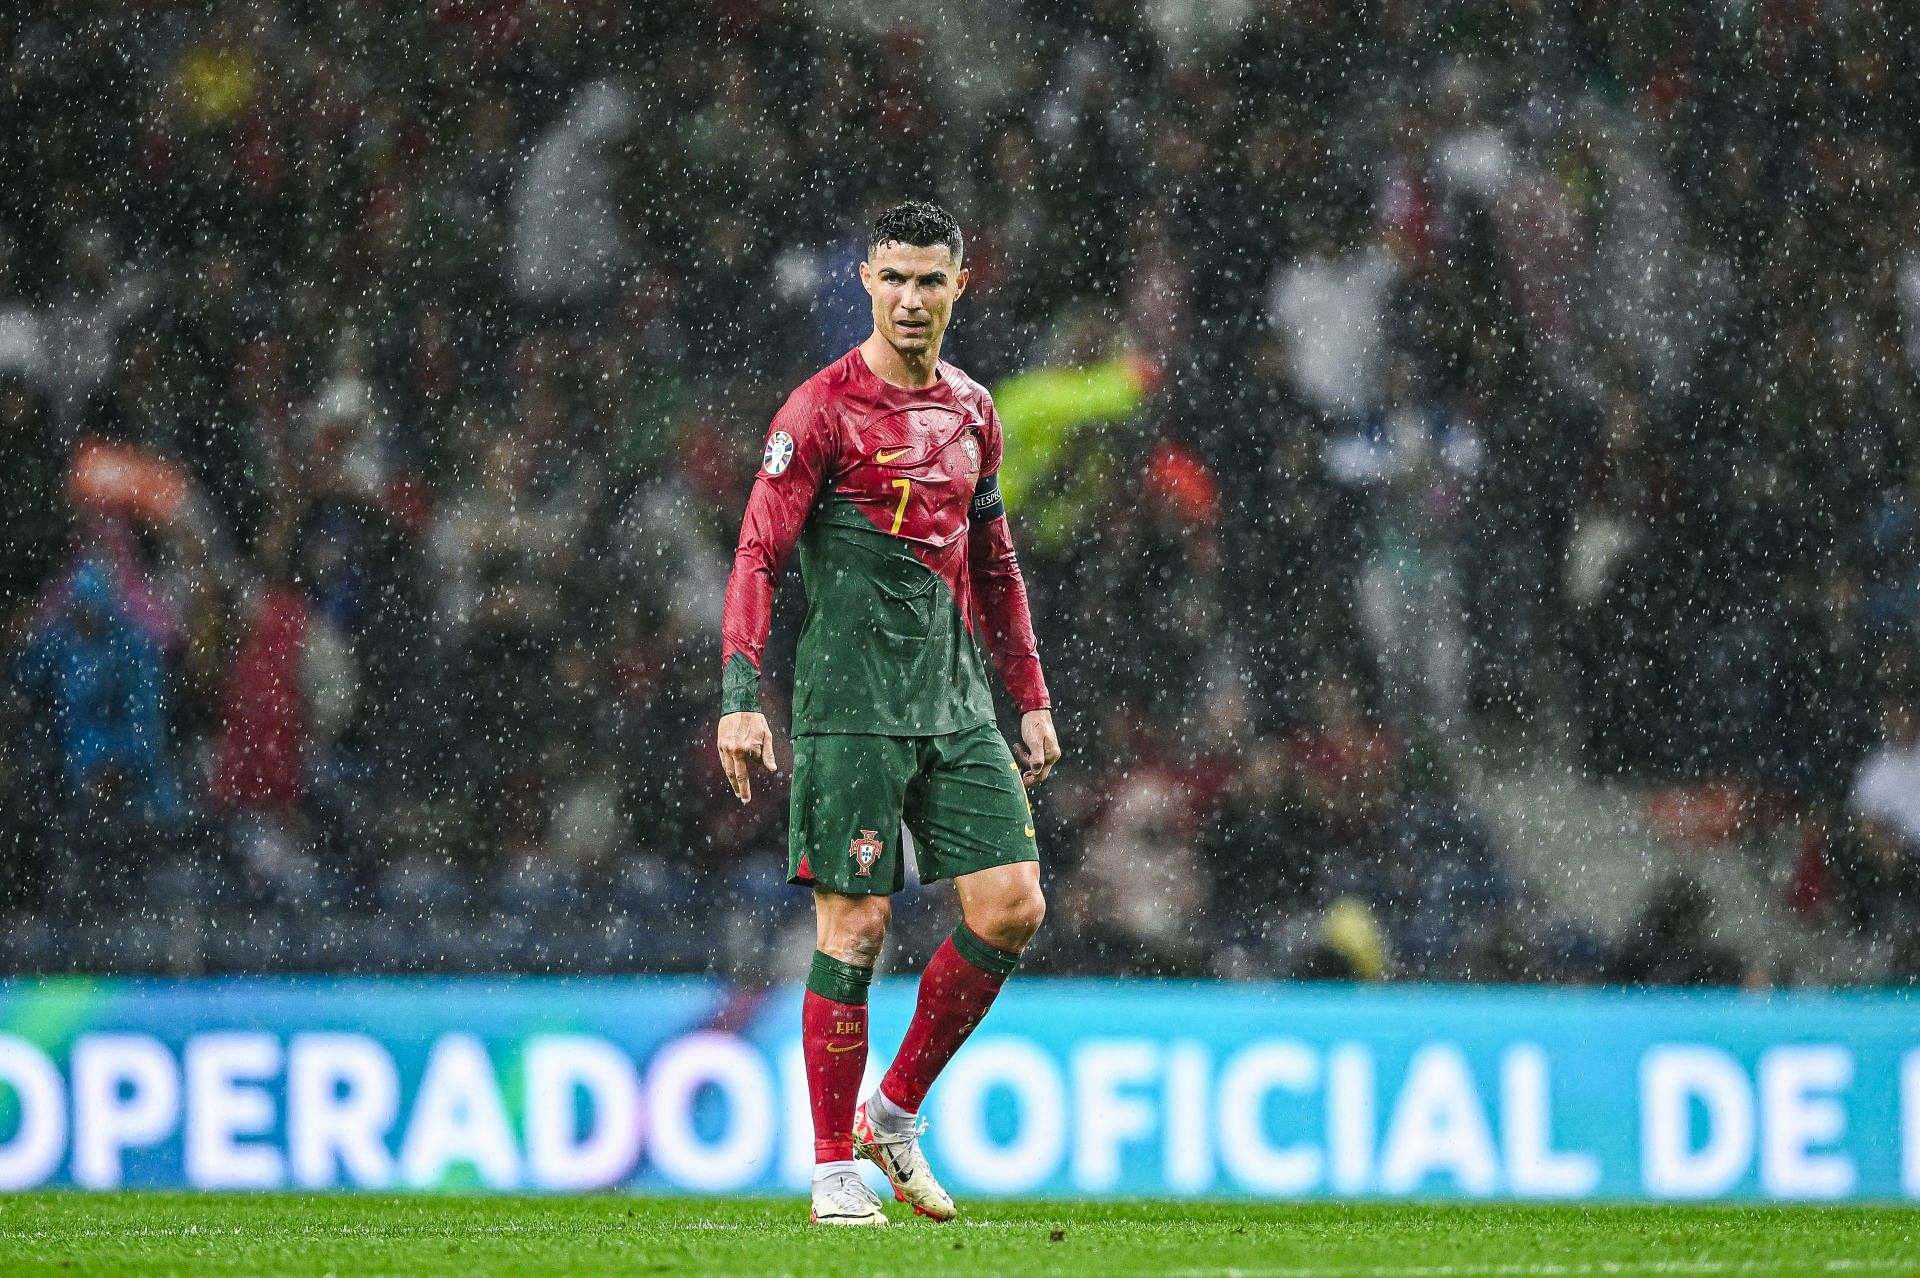 The Portuguese icon is in the twilight of his career.